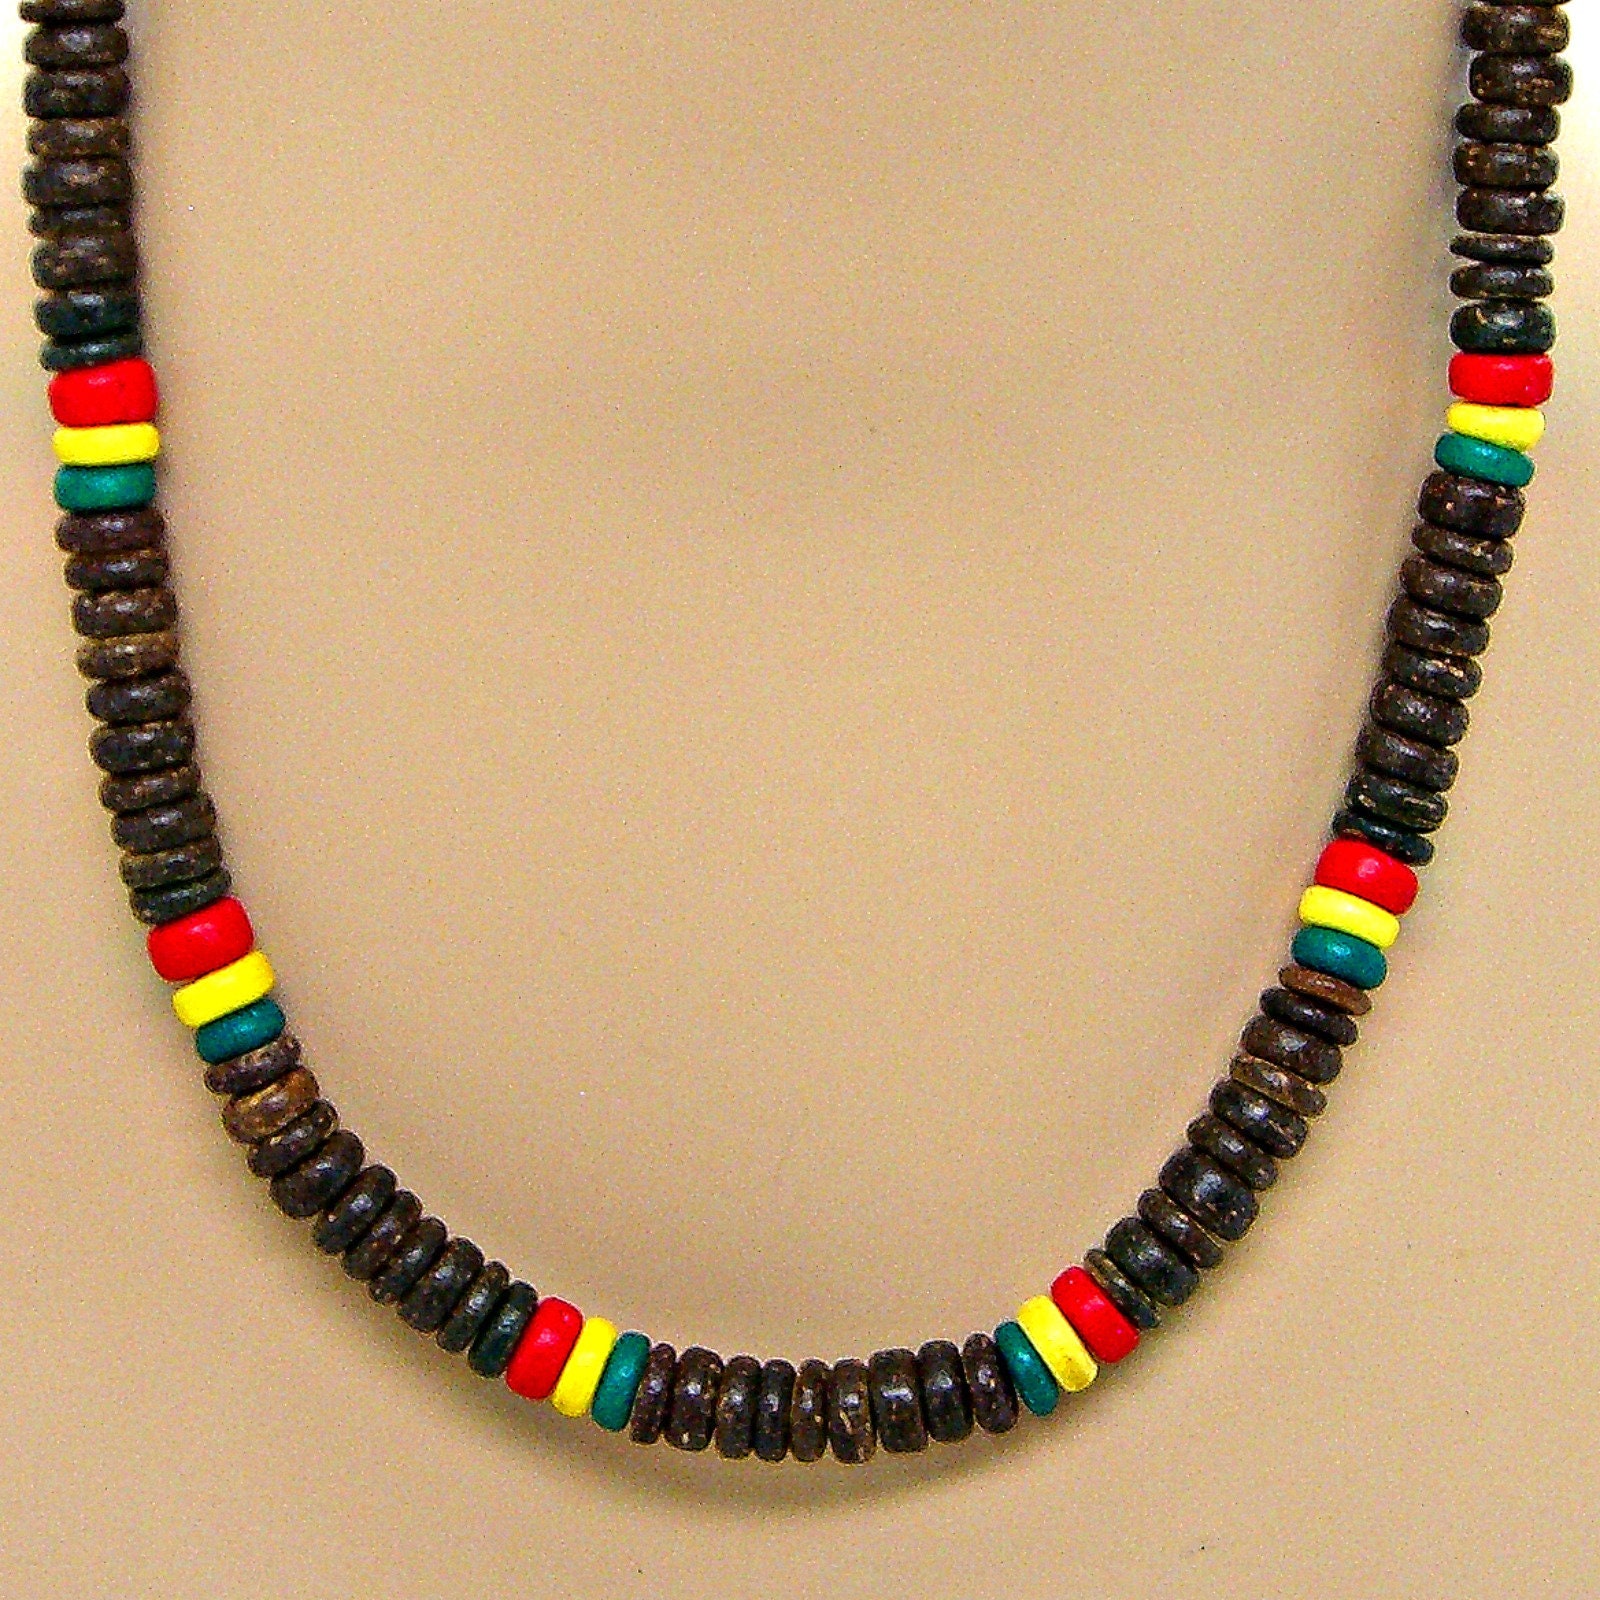 Details about   Rasta Necklace JAH Cure Marley Tiger 20 inch Length Choice of Pendants to add on 